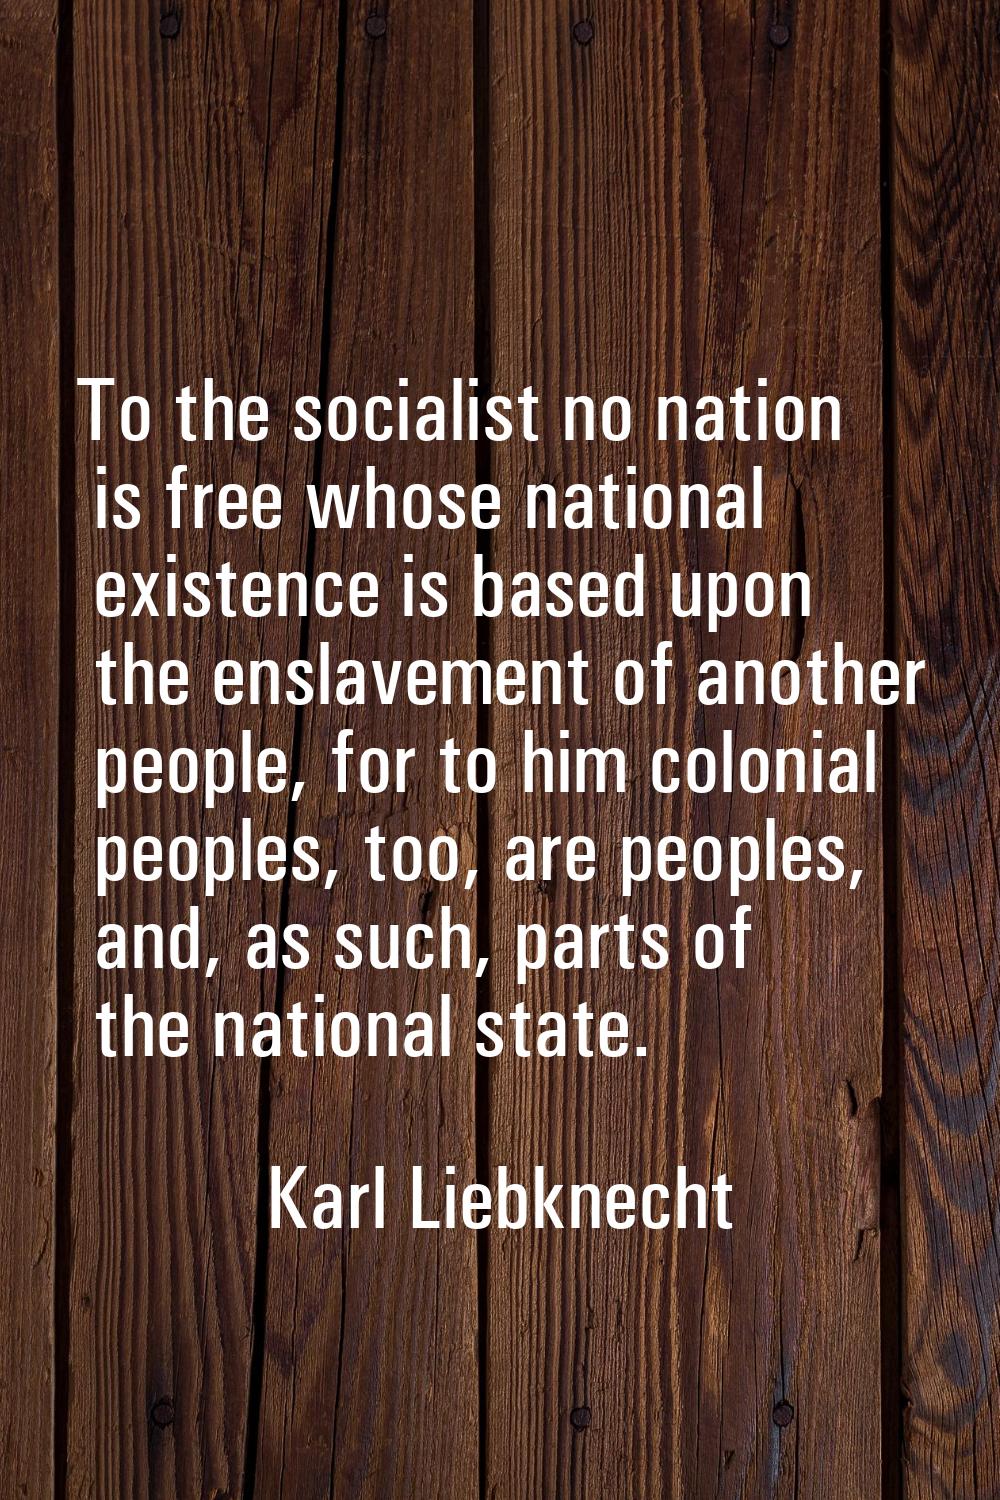 To the socialist no nation is free whose national existence is based upon the enslavement of anothe